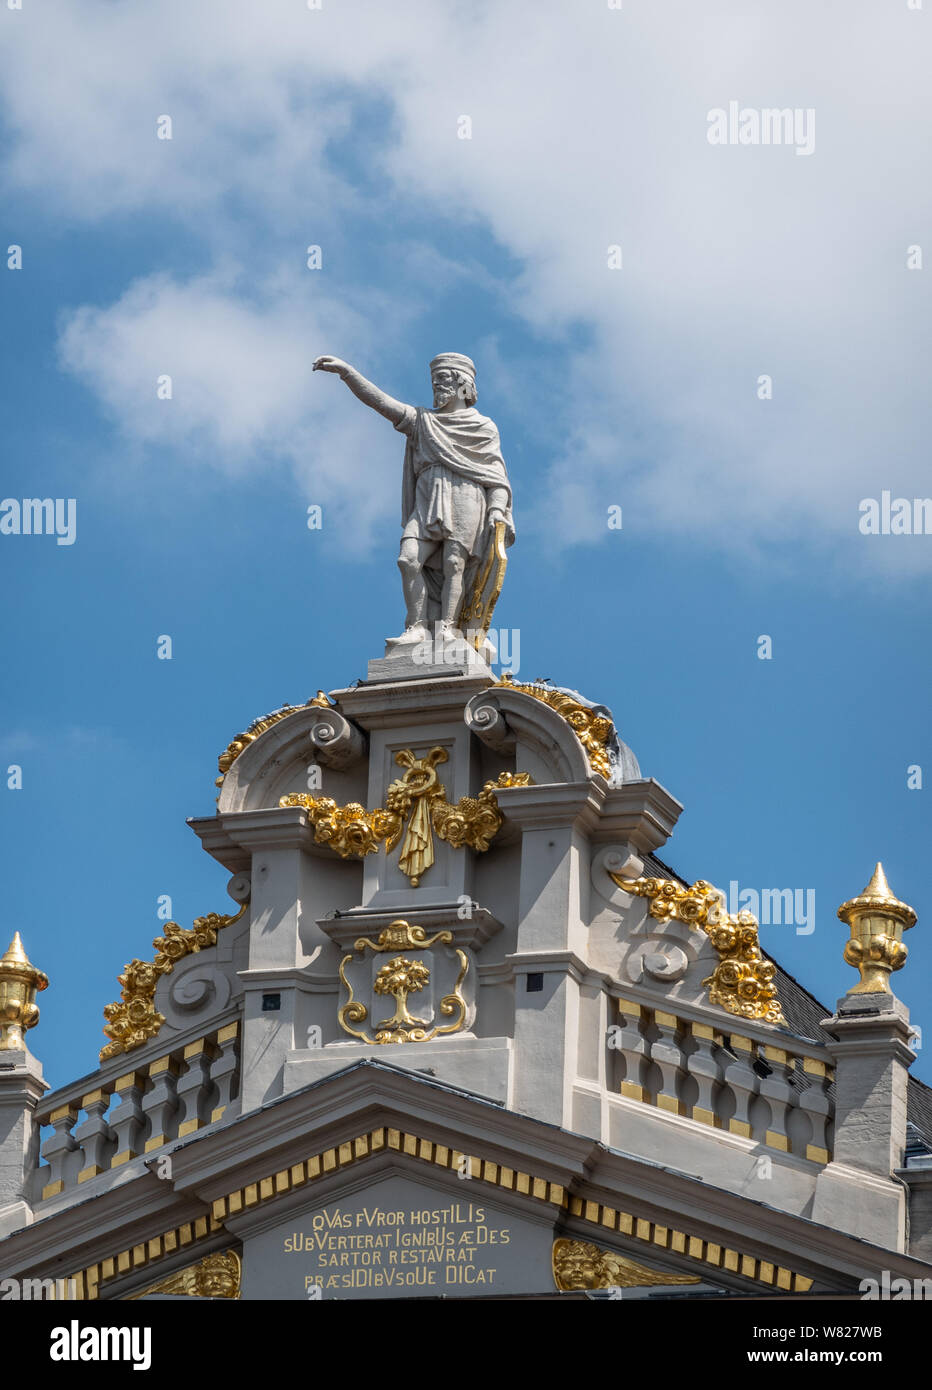 Brussels, Belgium - June 22, 2019: Statue of Saint Homobonus of Cremona on top of gable of La Chaloupe D’Or buidling on Grand Place against blue sky w Stock Photo